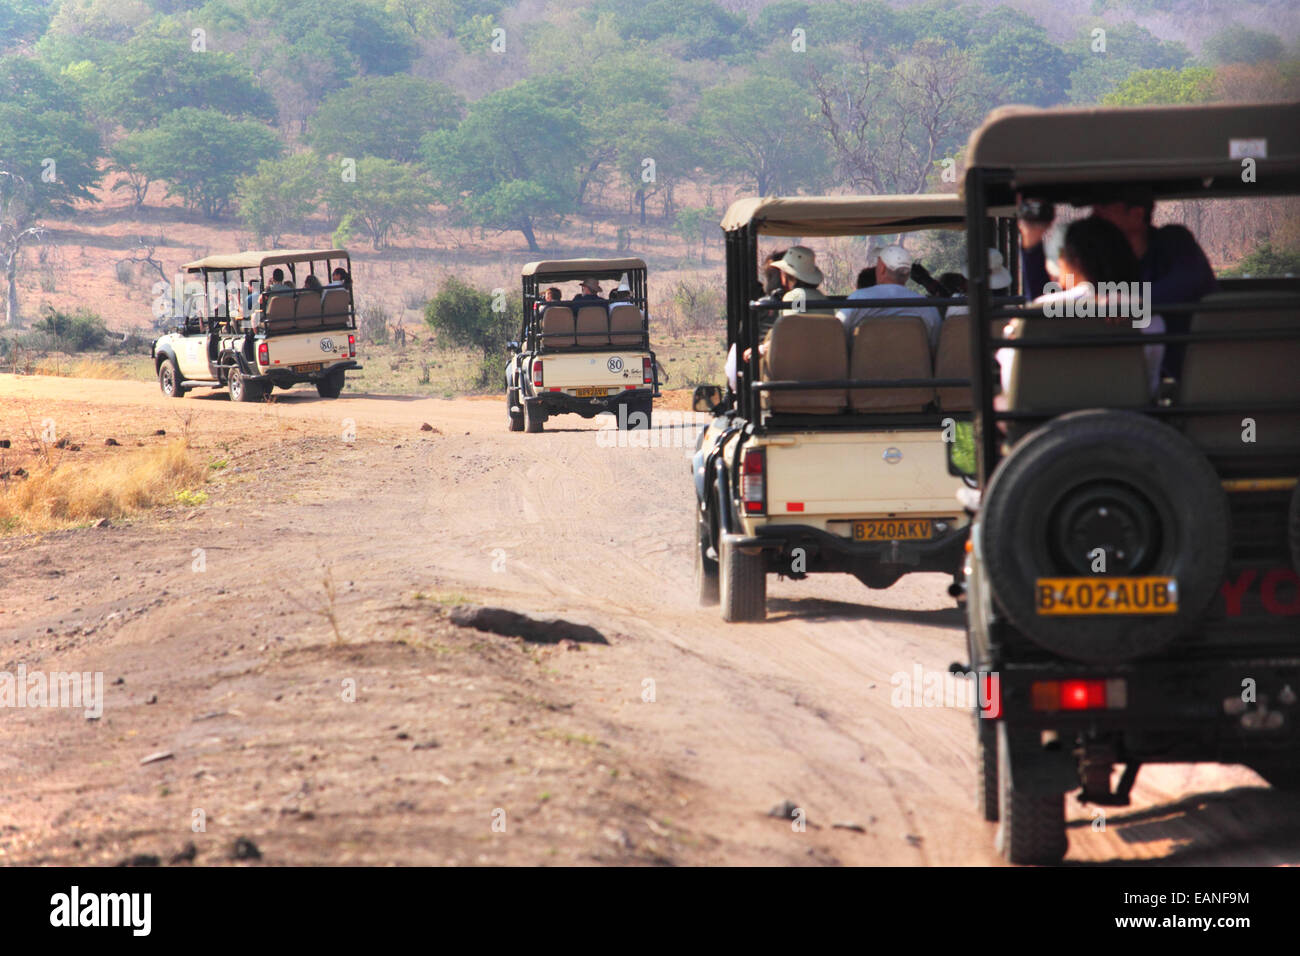 A line of four wheel drive safari vehicles on a game drive in Africa. Stock Photo